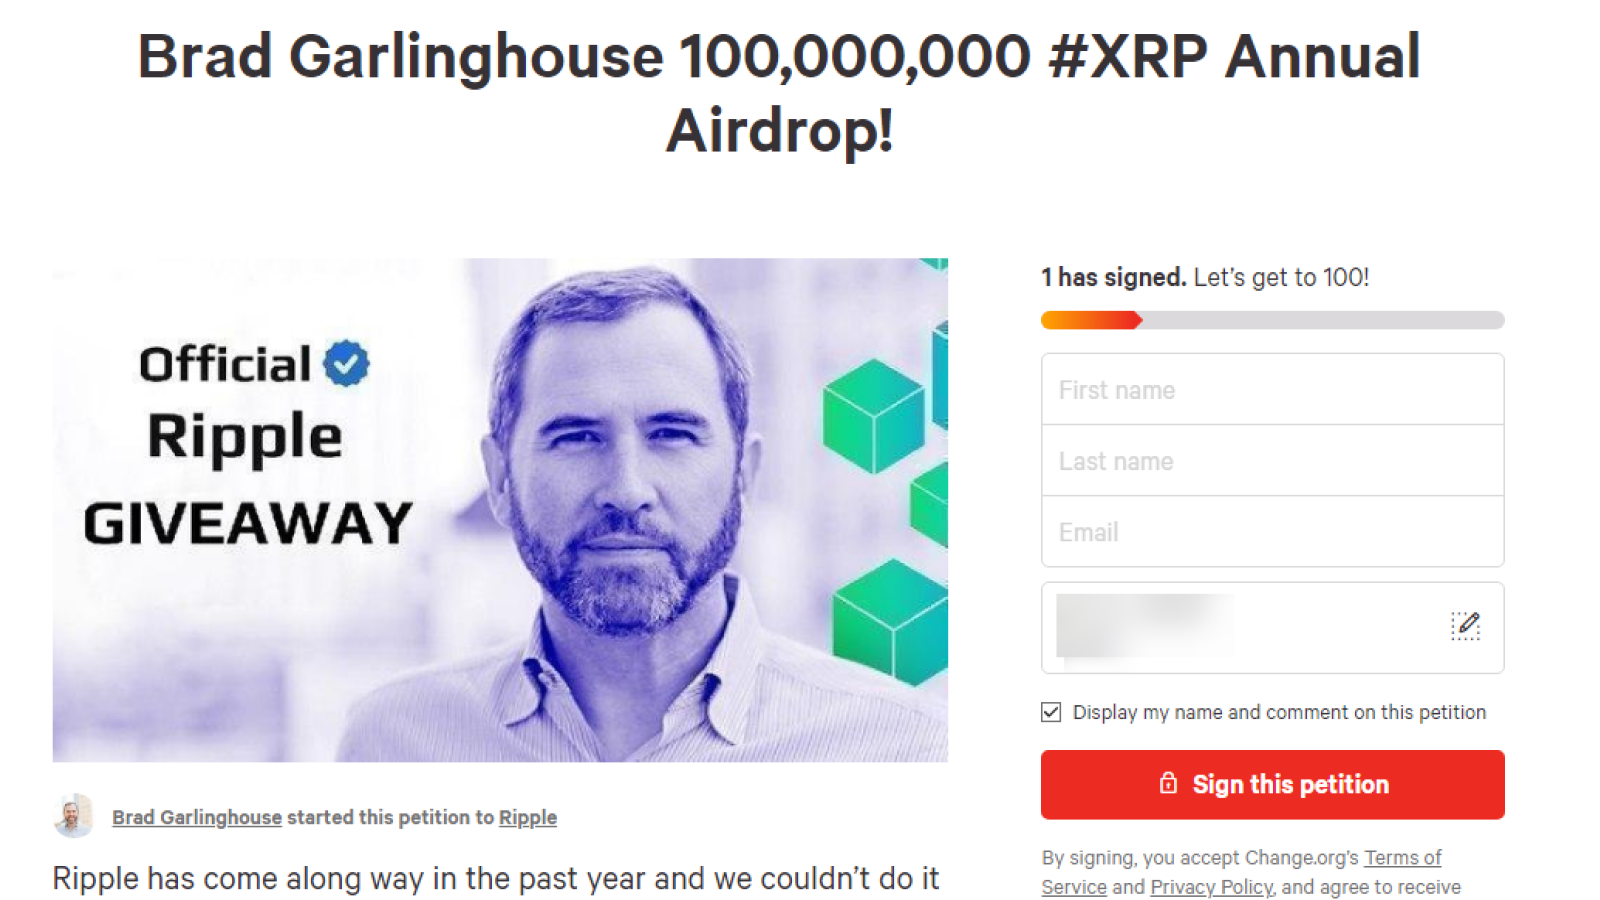 Brad Garlinghouse allegedly addresses his own Ripple with a public petition